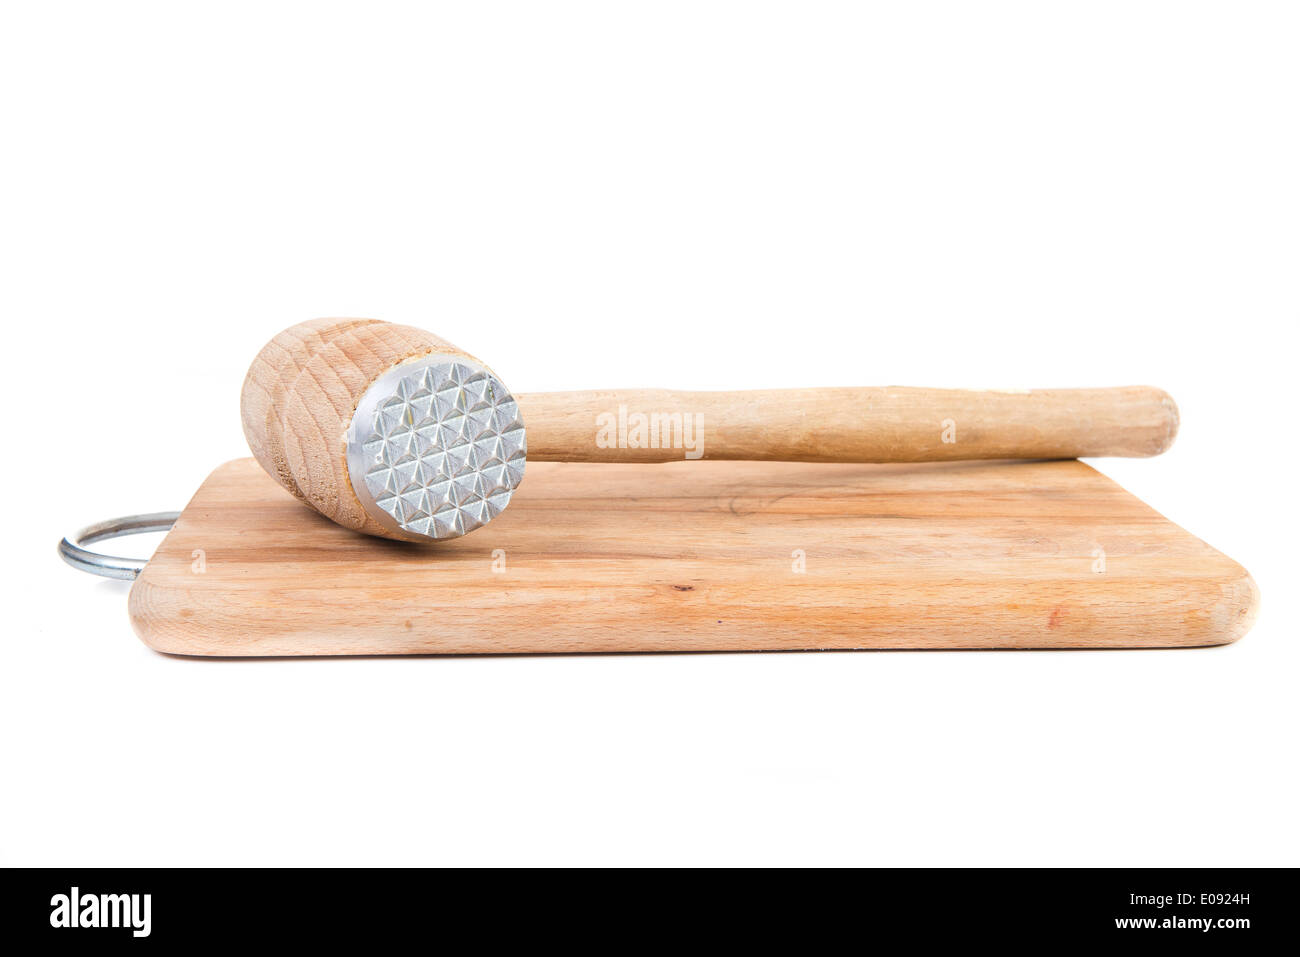 meat tenderizer and board on white background Stock Photo